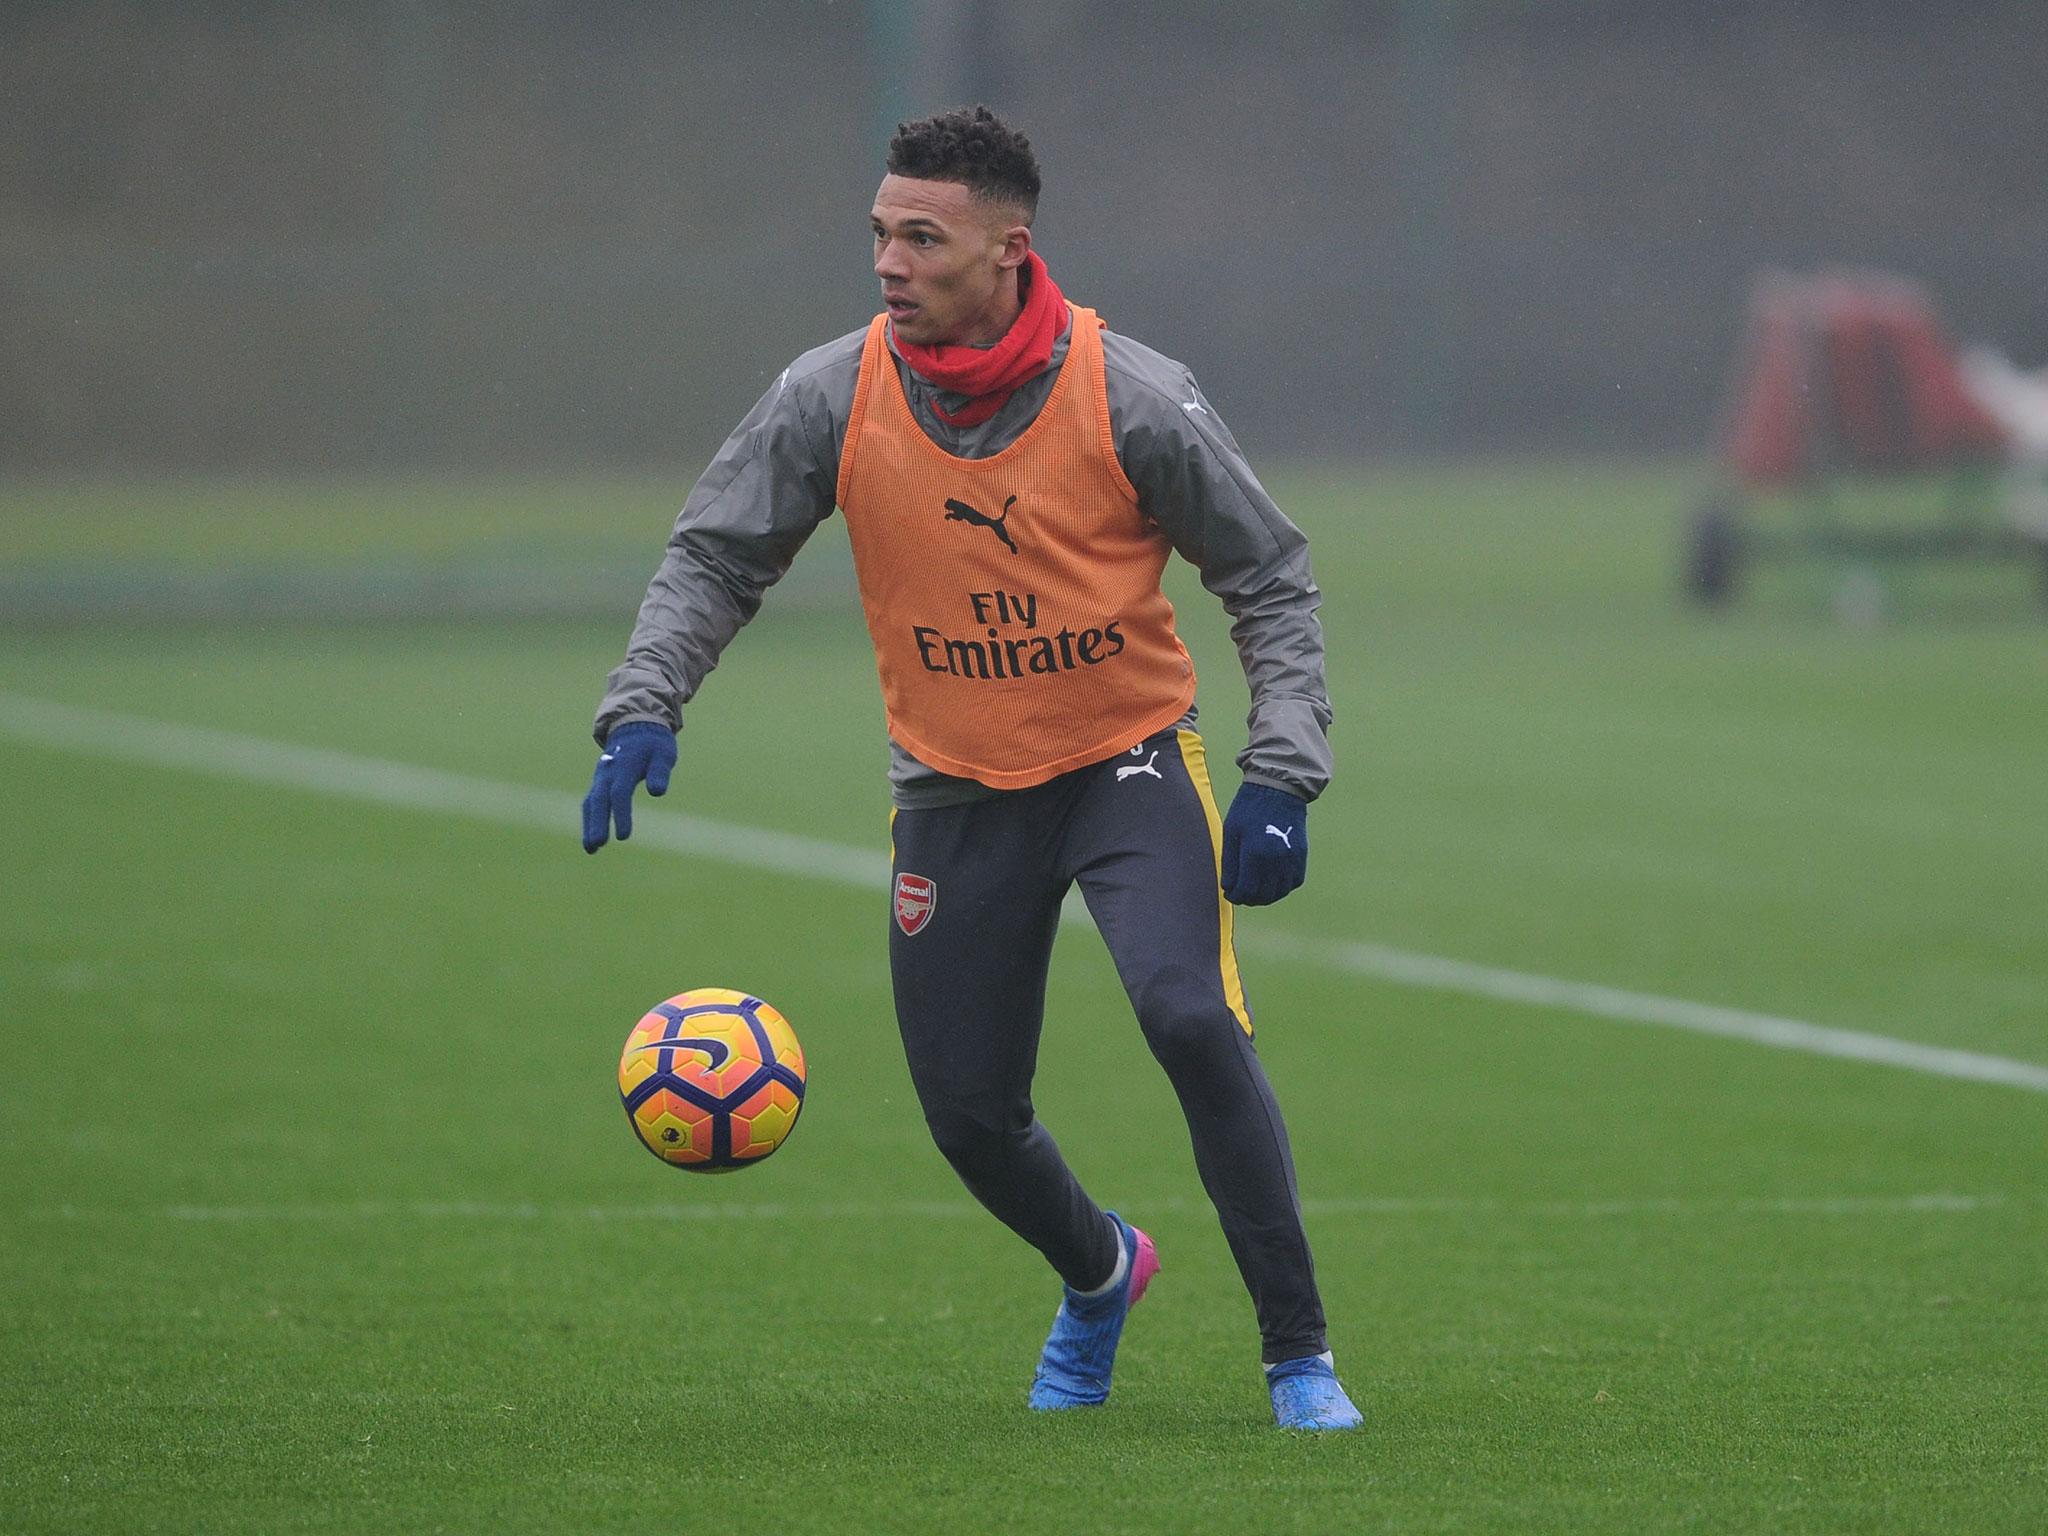 Theres more to come from Arsenal, says defiant Kieran Gibbs The Independent The Independent